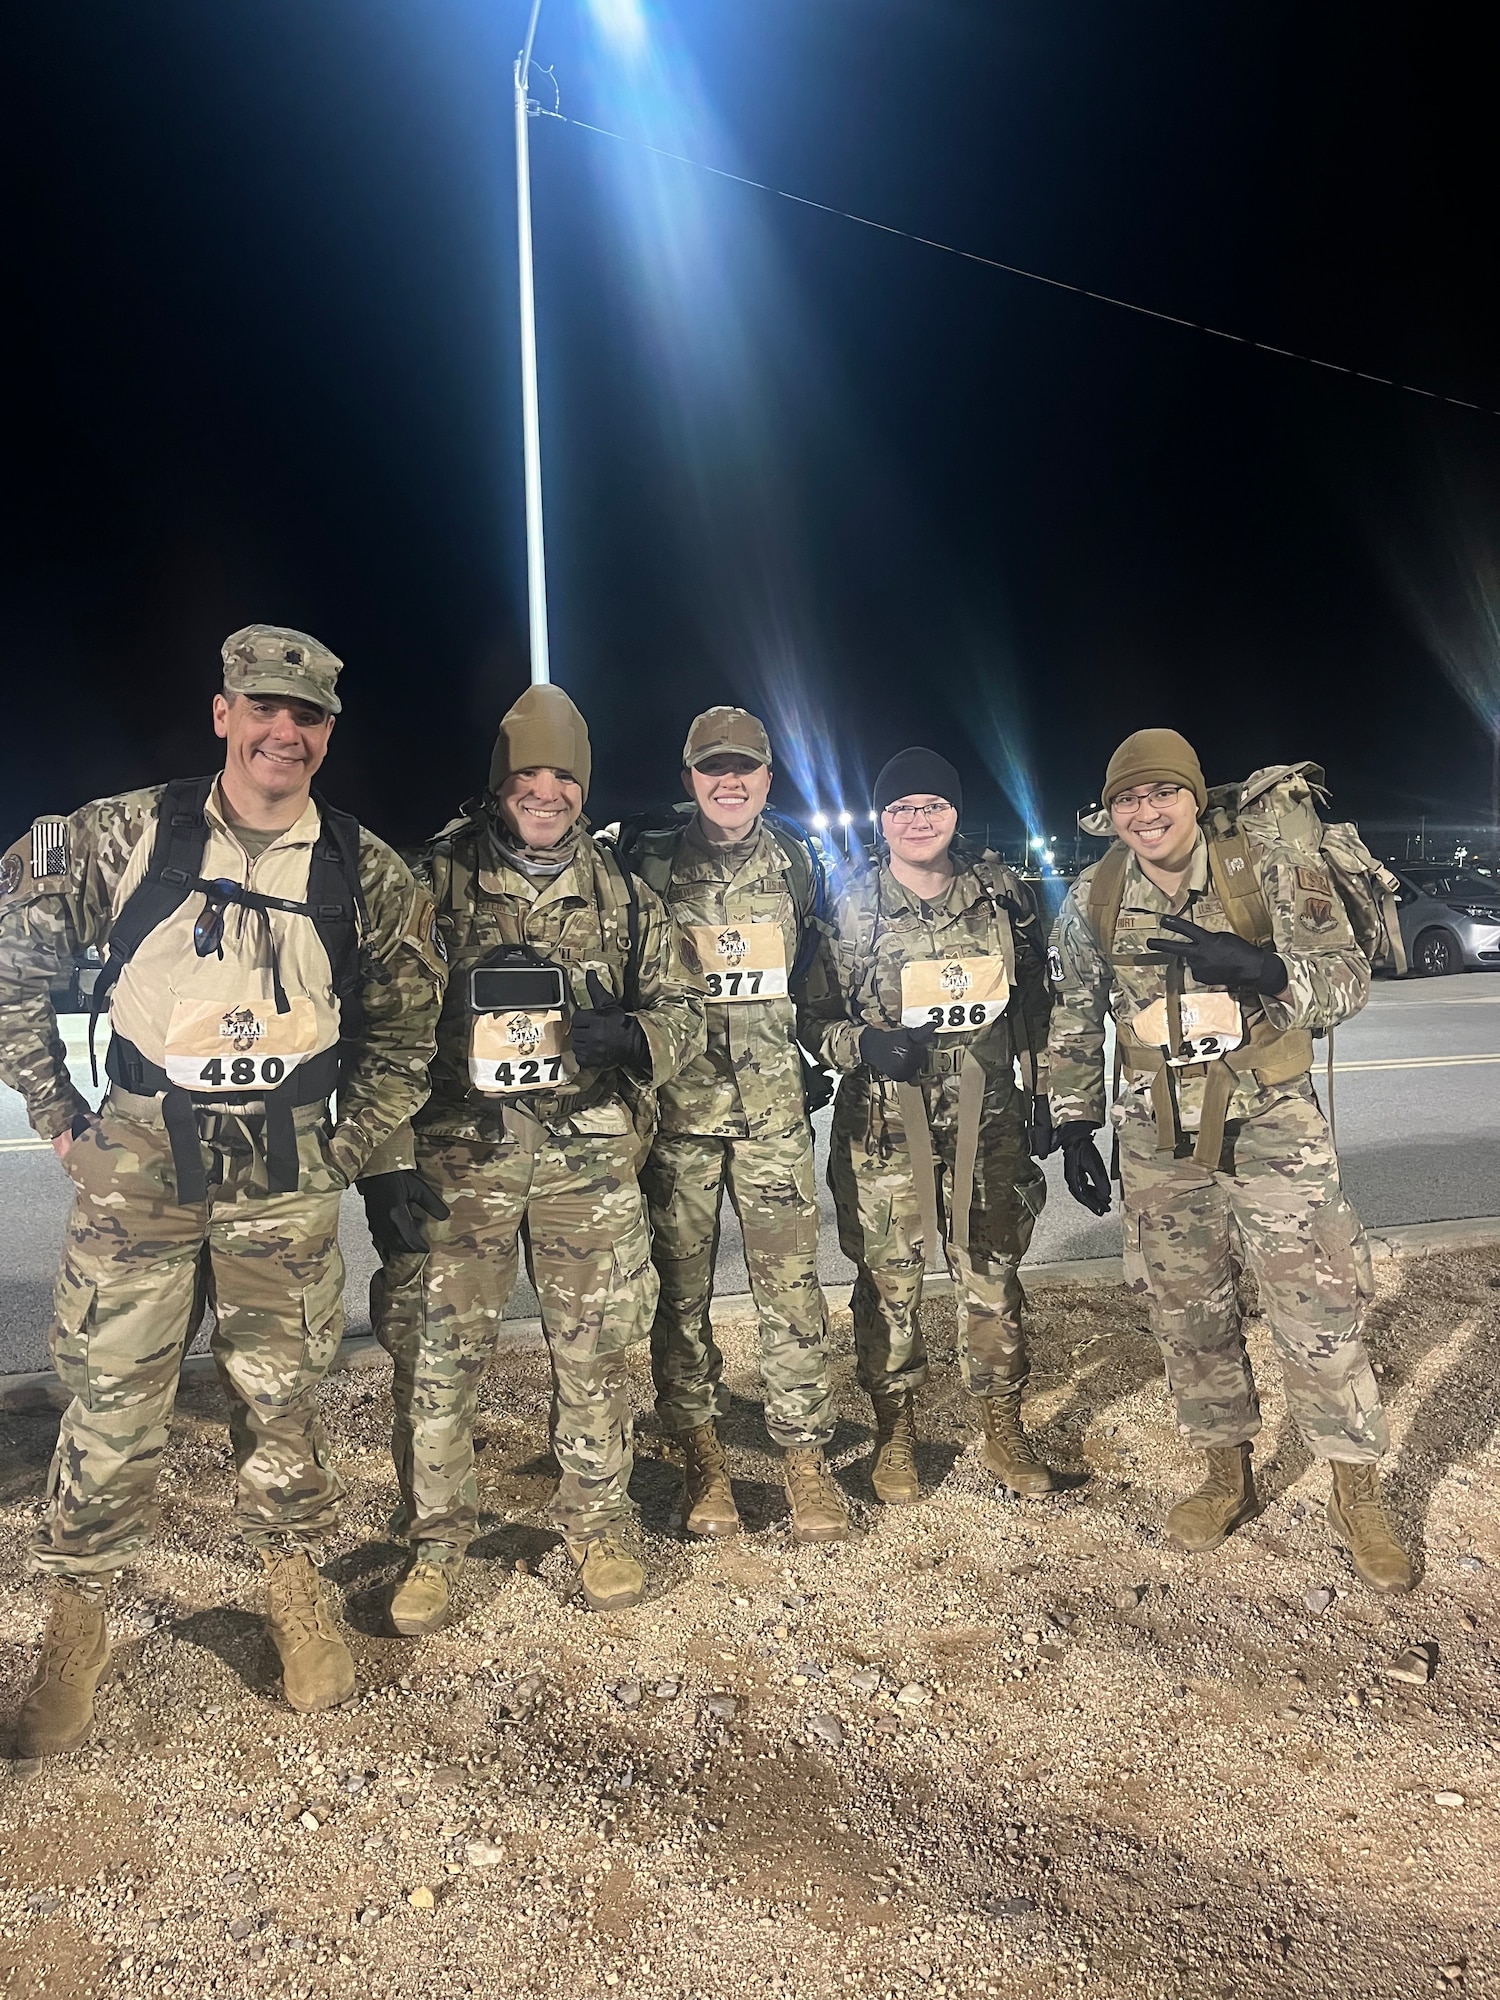 Lt. Col. William Selber, TSgt David Eckstein, SrA Alexis Cassidy, SSgt Misty Younce, and TSgt Joshua Hurt current and former members of the 451st Intelligence Squadron at the start line of the Bataan Memorial Death March.